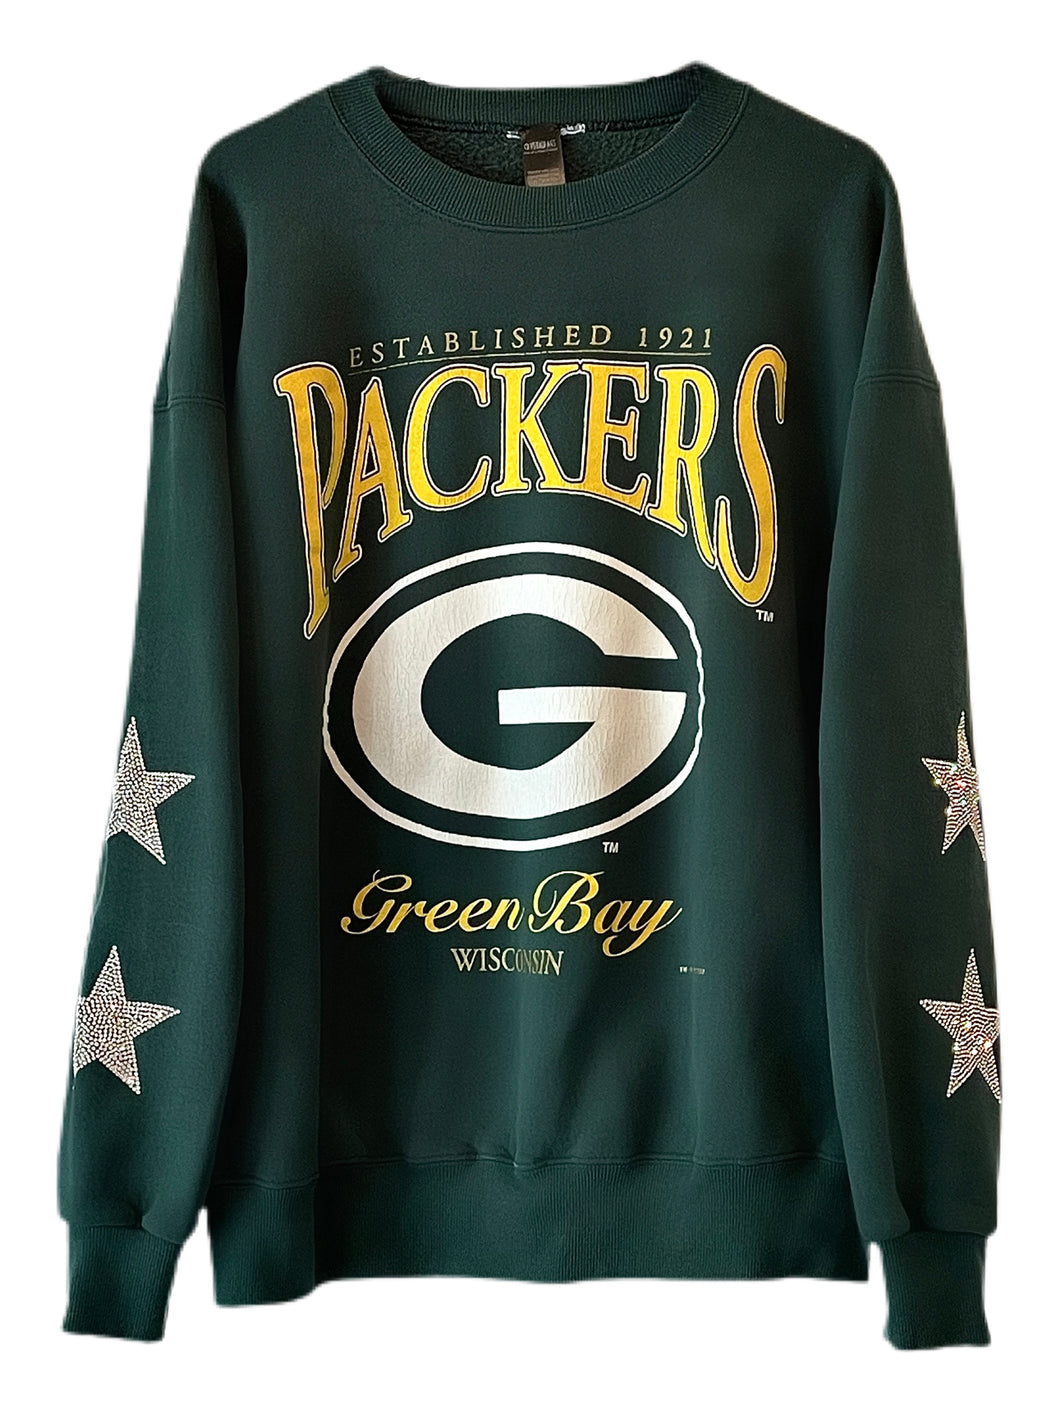 Green Bay Packers, NFL One of a KIND Vintage Sweatshirt with Crystal Star Design